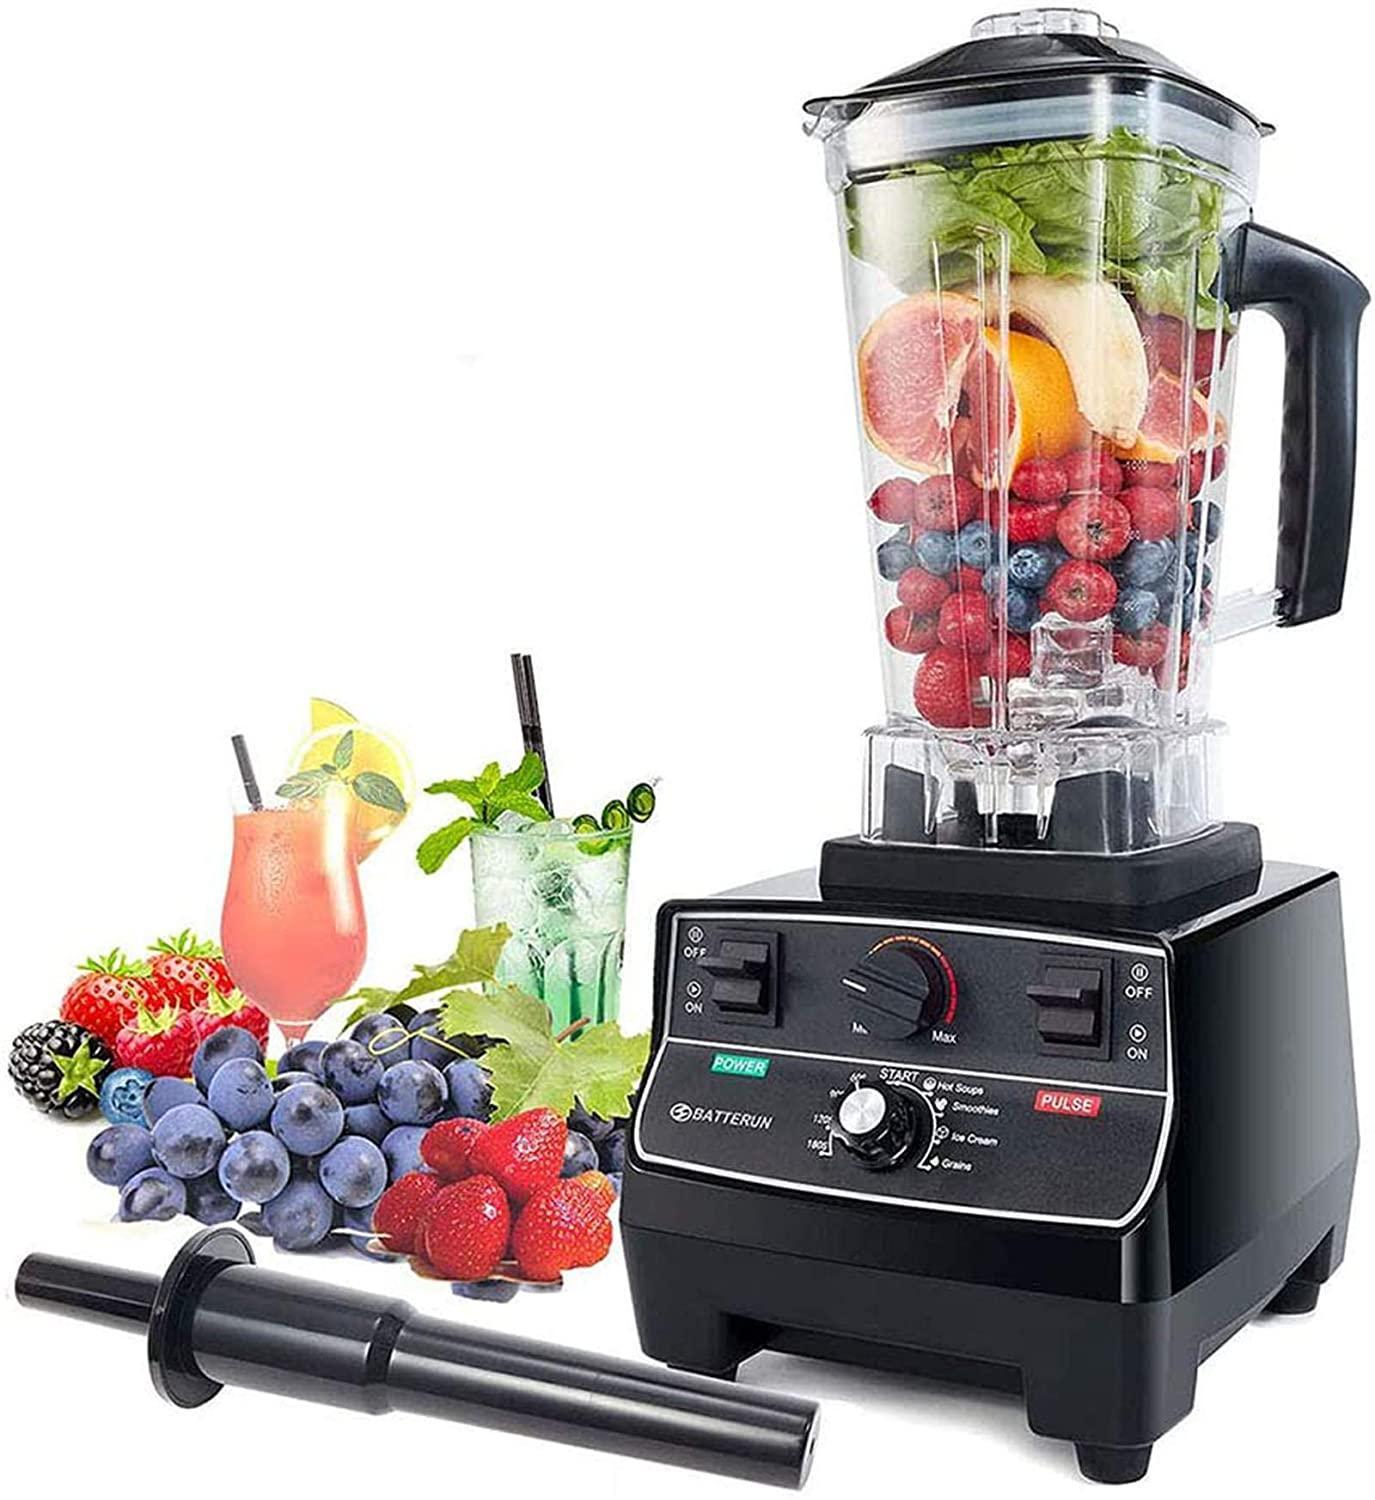 Professional Countertop Blender for Kitchen Max 2200W High Power Home and Commercial Blender with Timer